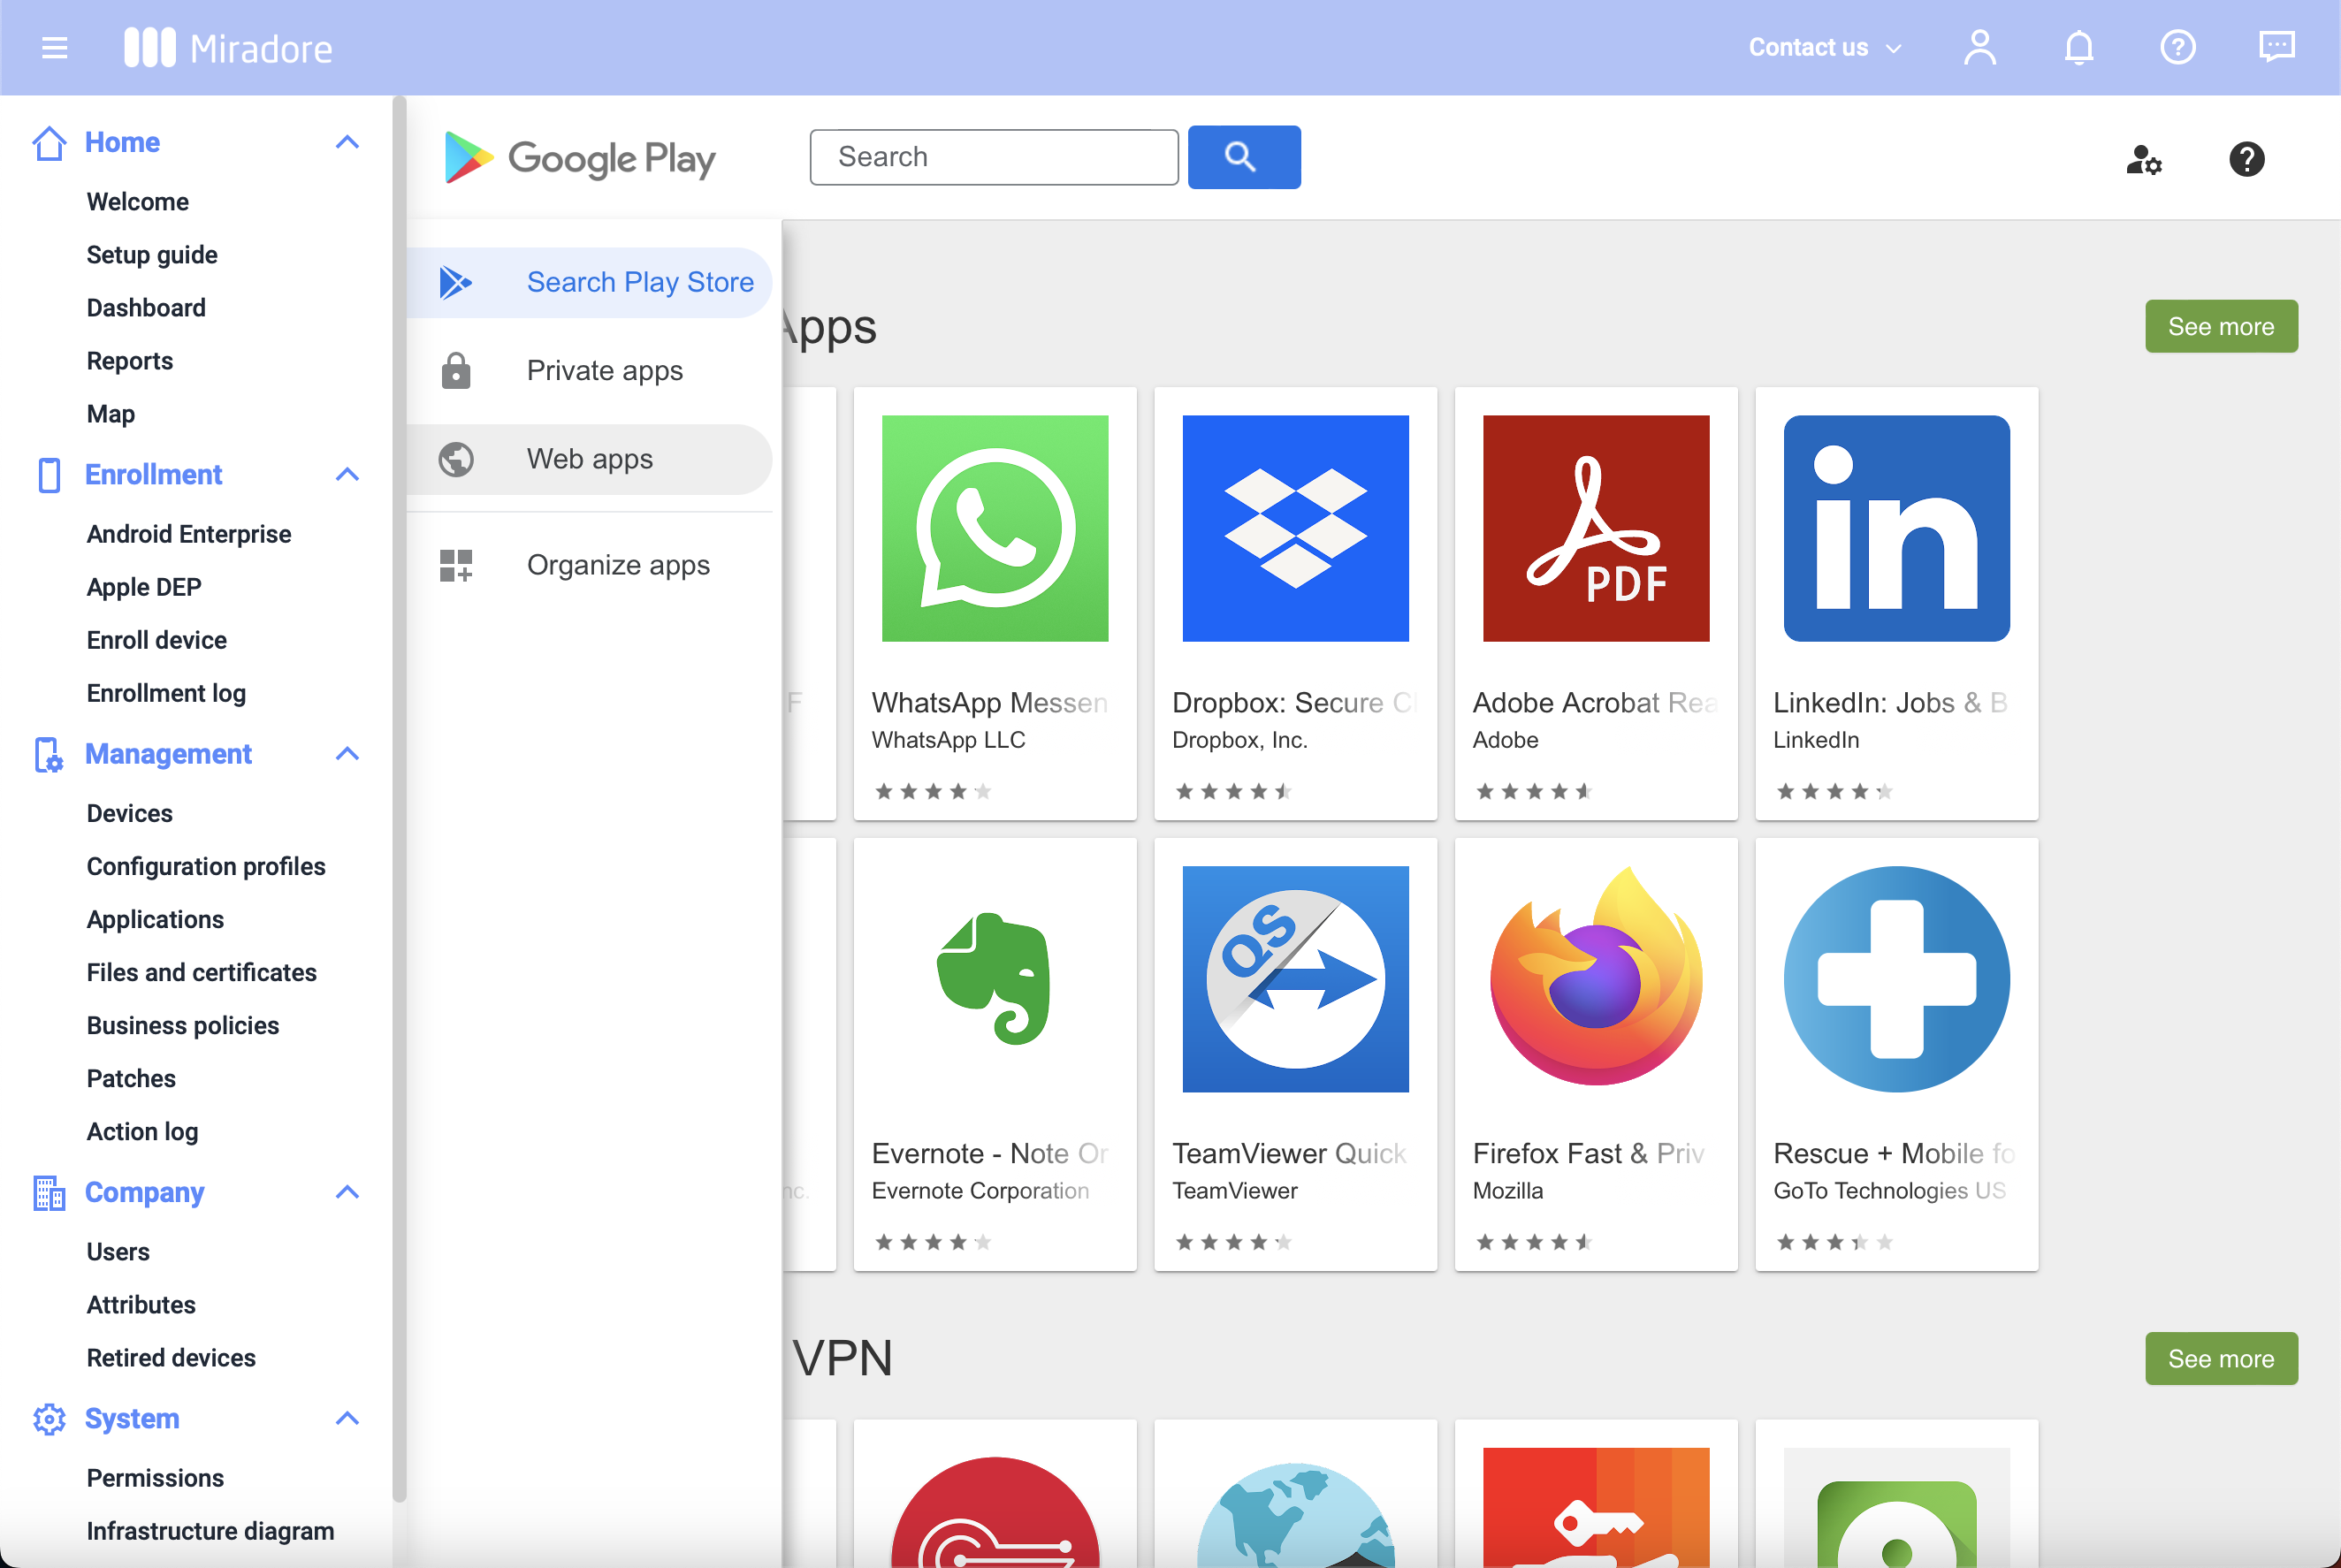 How to search web apps from the managed Google Play